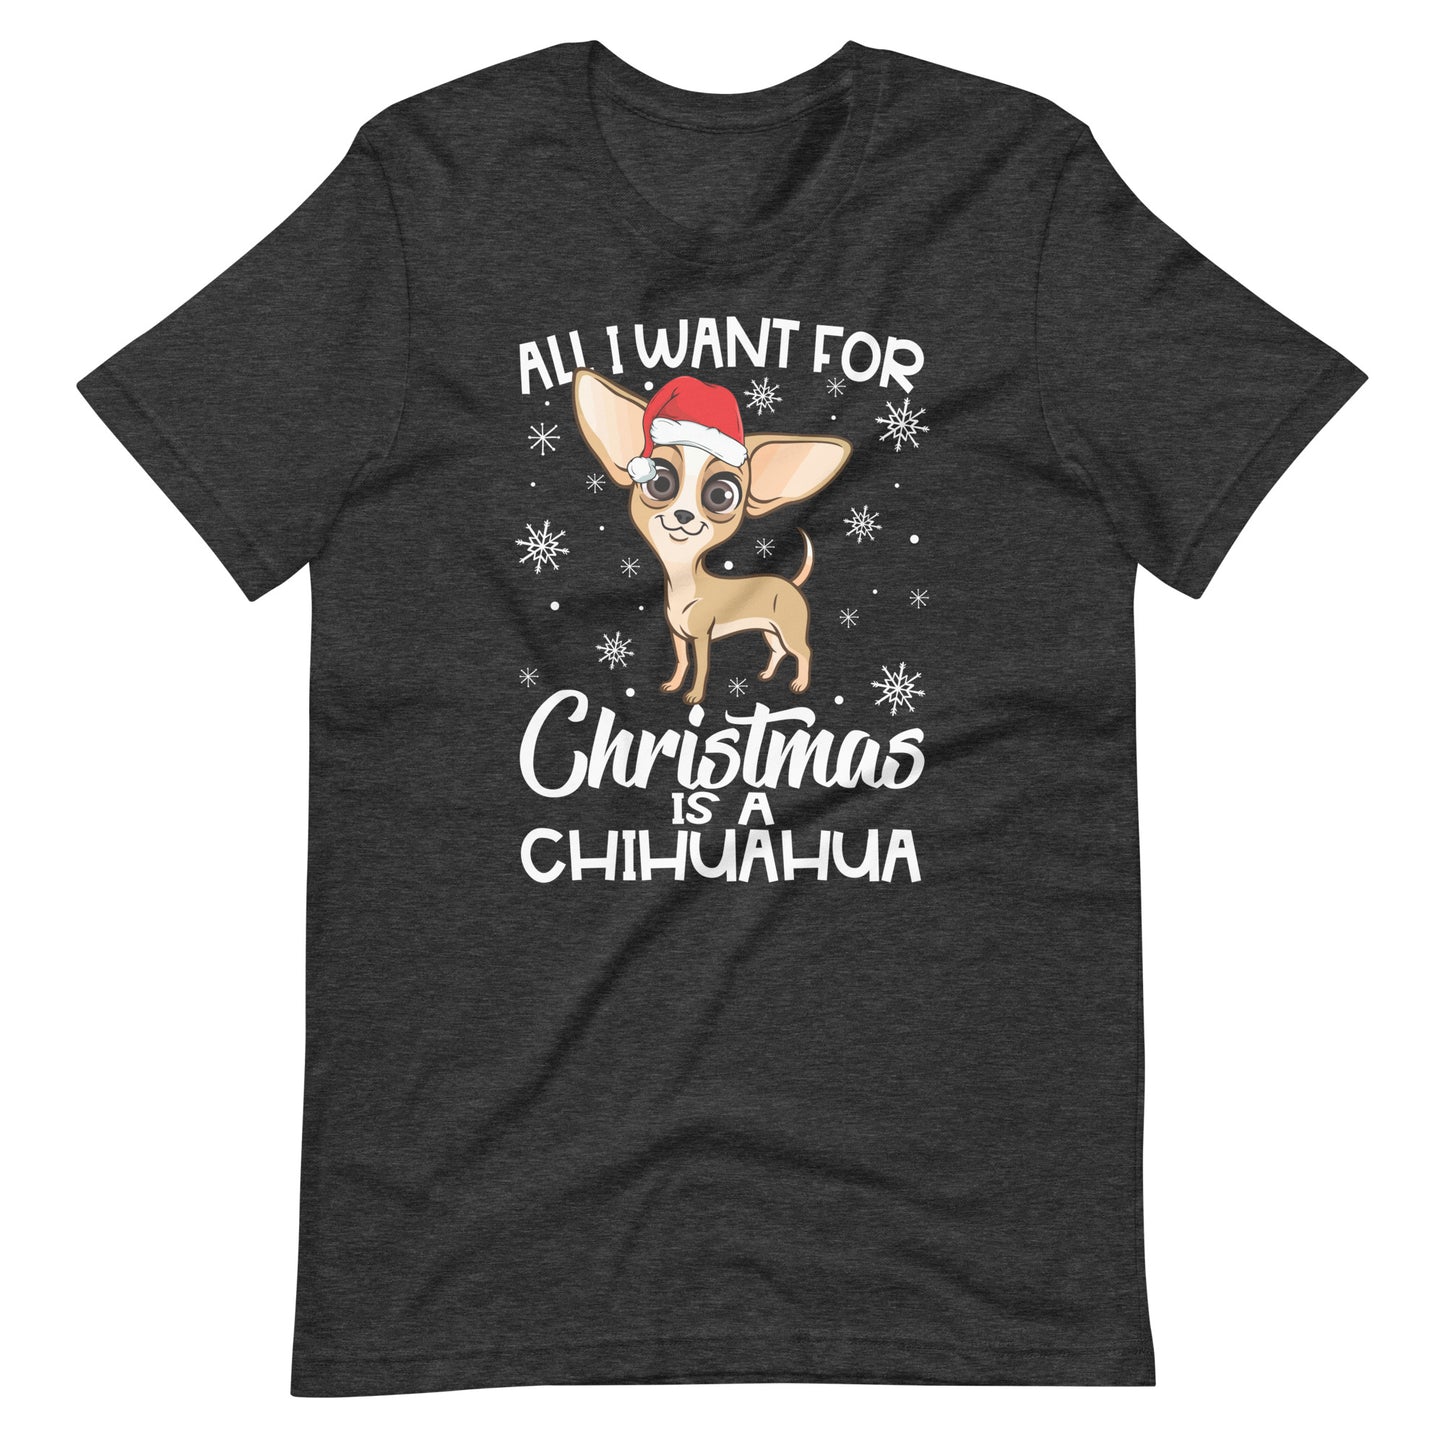 All I Want for Christmas is Chihuahua T-Shirt